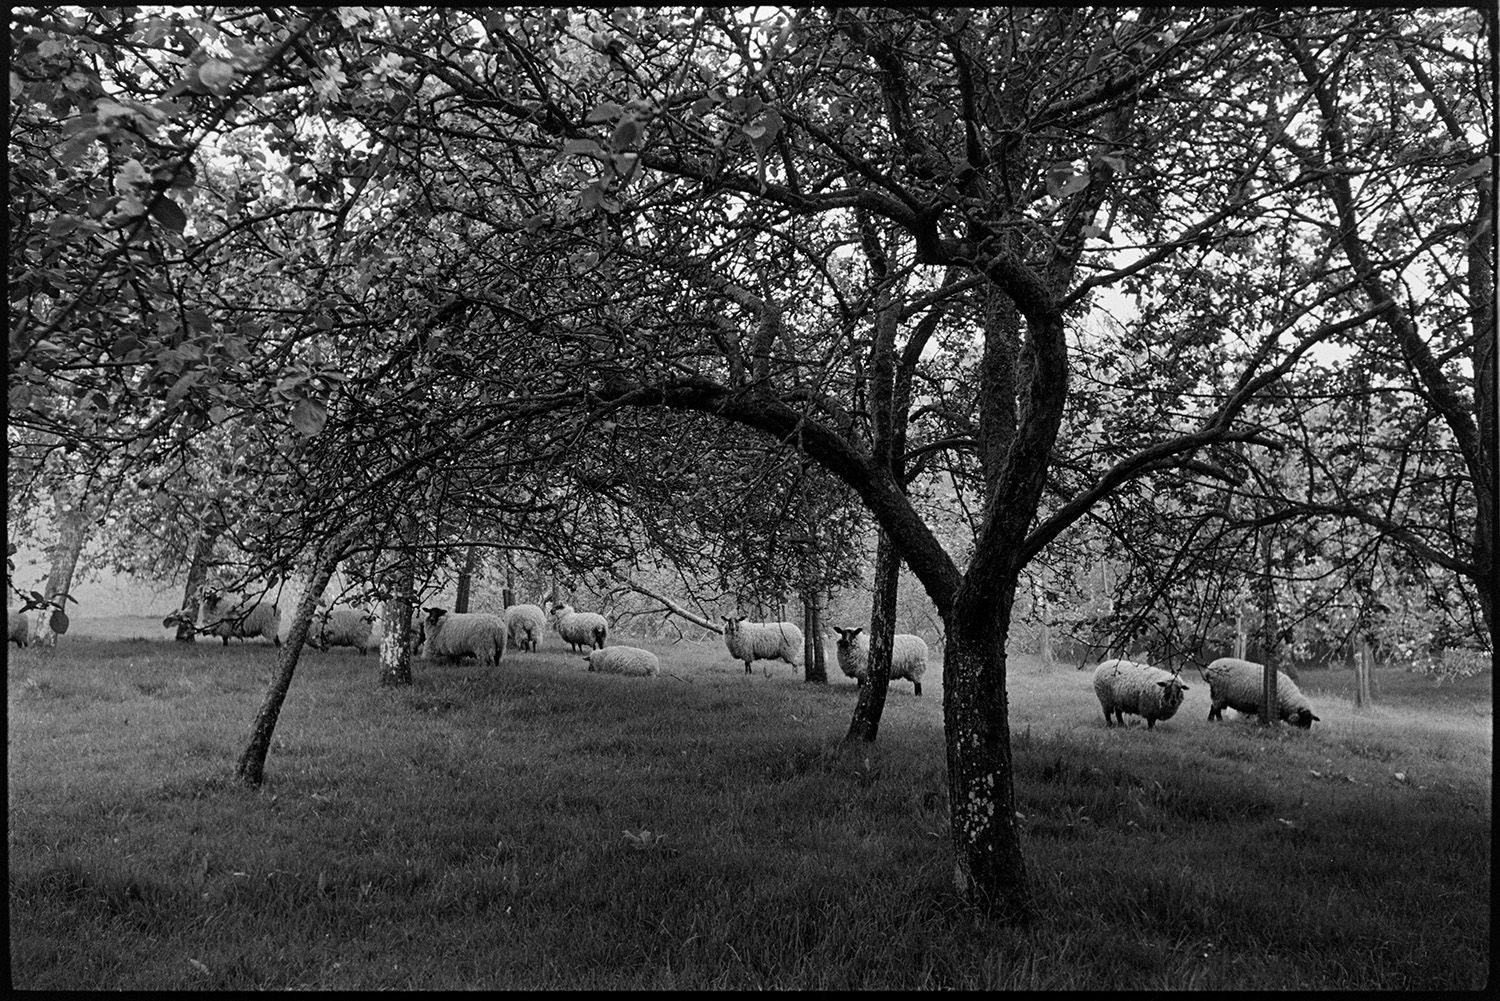 Orchards, sheep grazing.
[A flock of sheep grazing under the apple trees in an orchard at Church Farm, Chawleigh.]